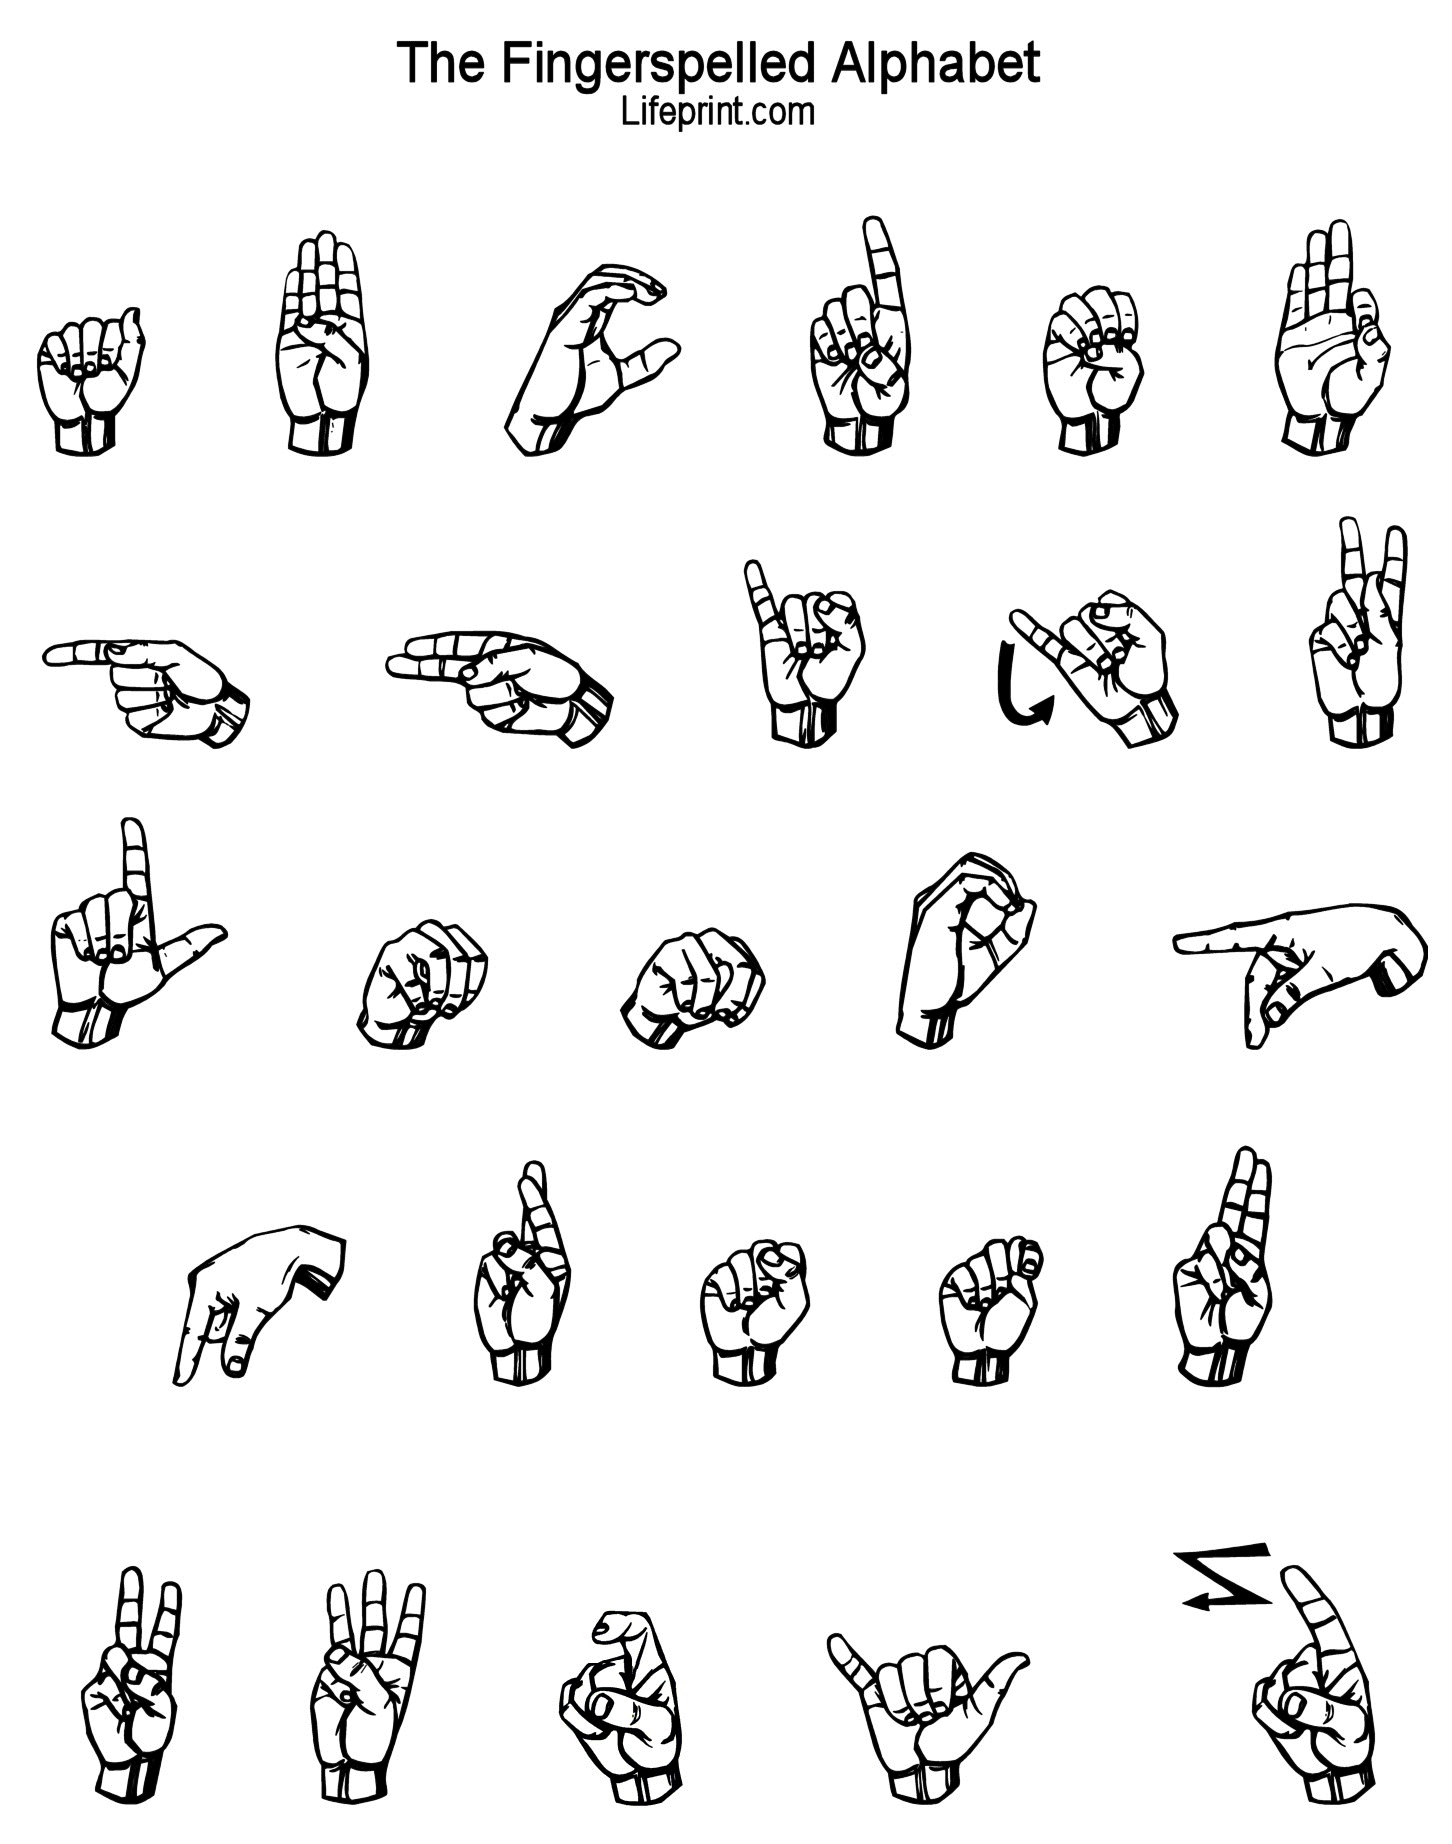 how to say in sign language i love you